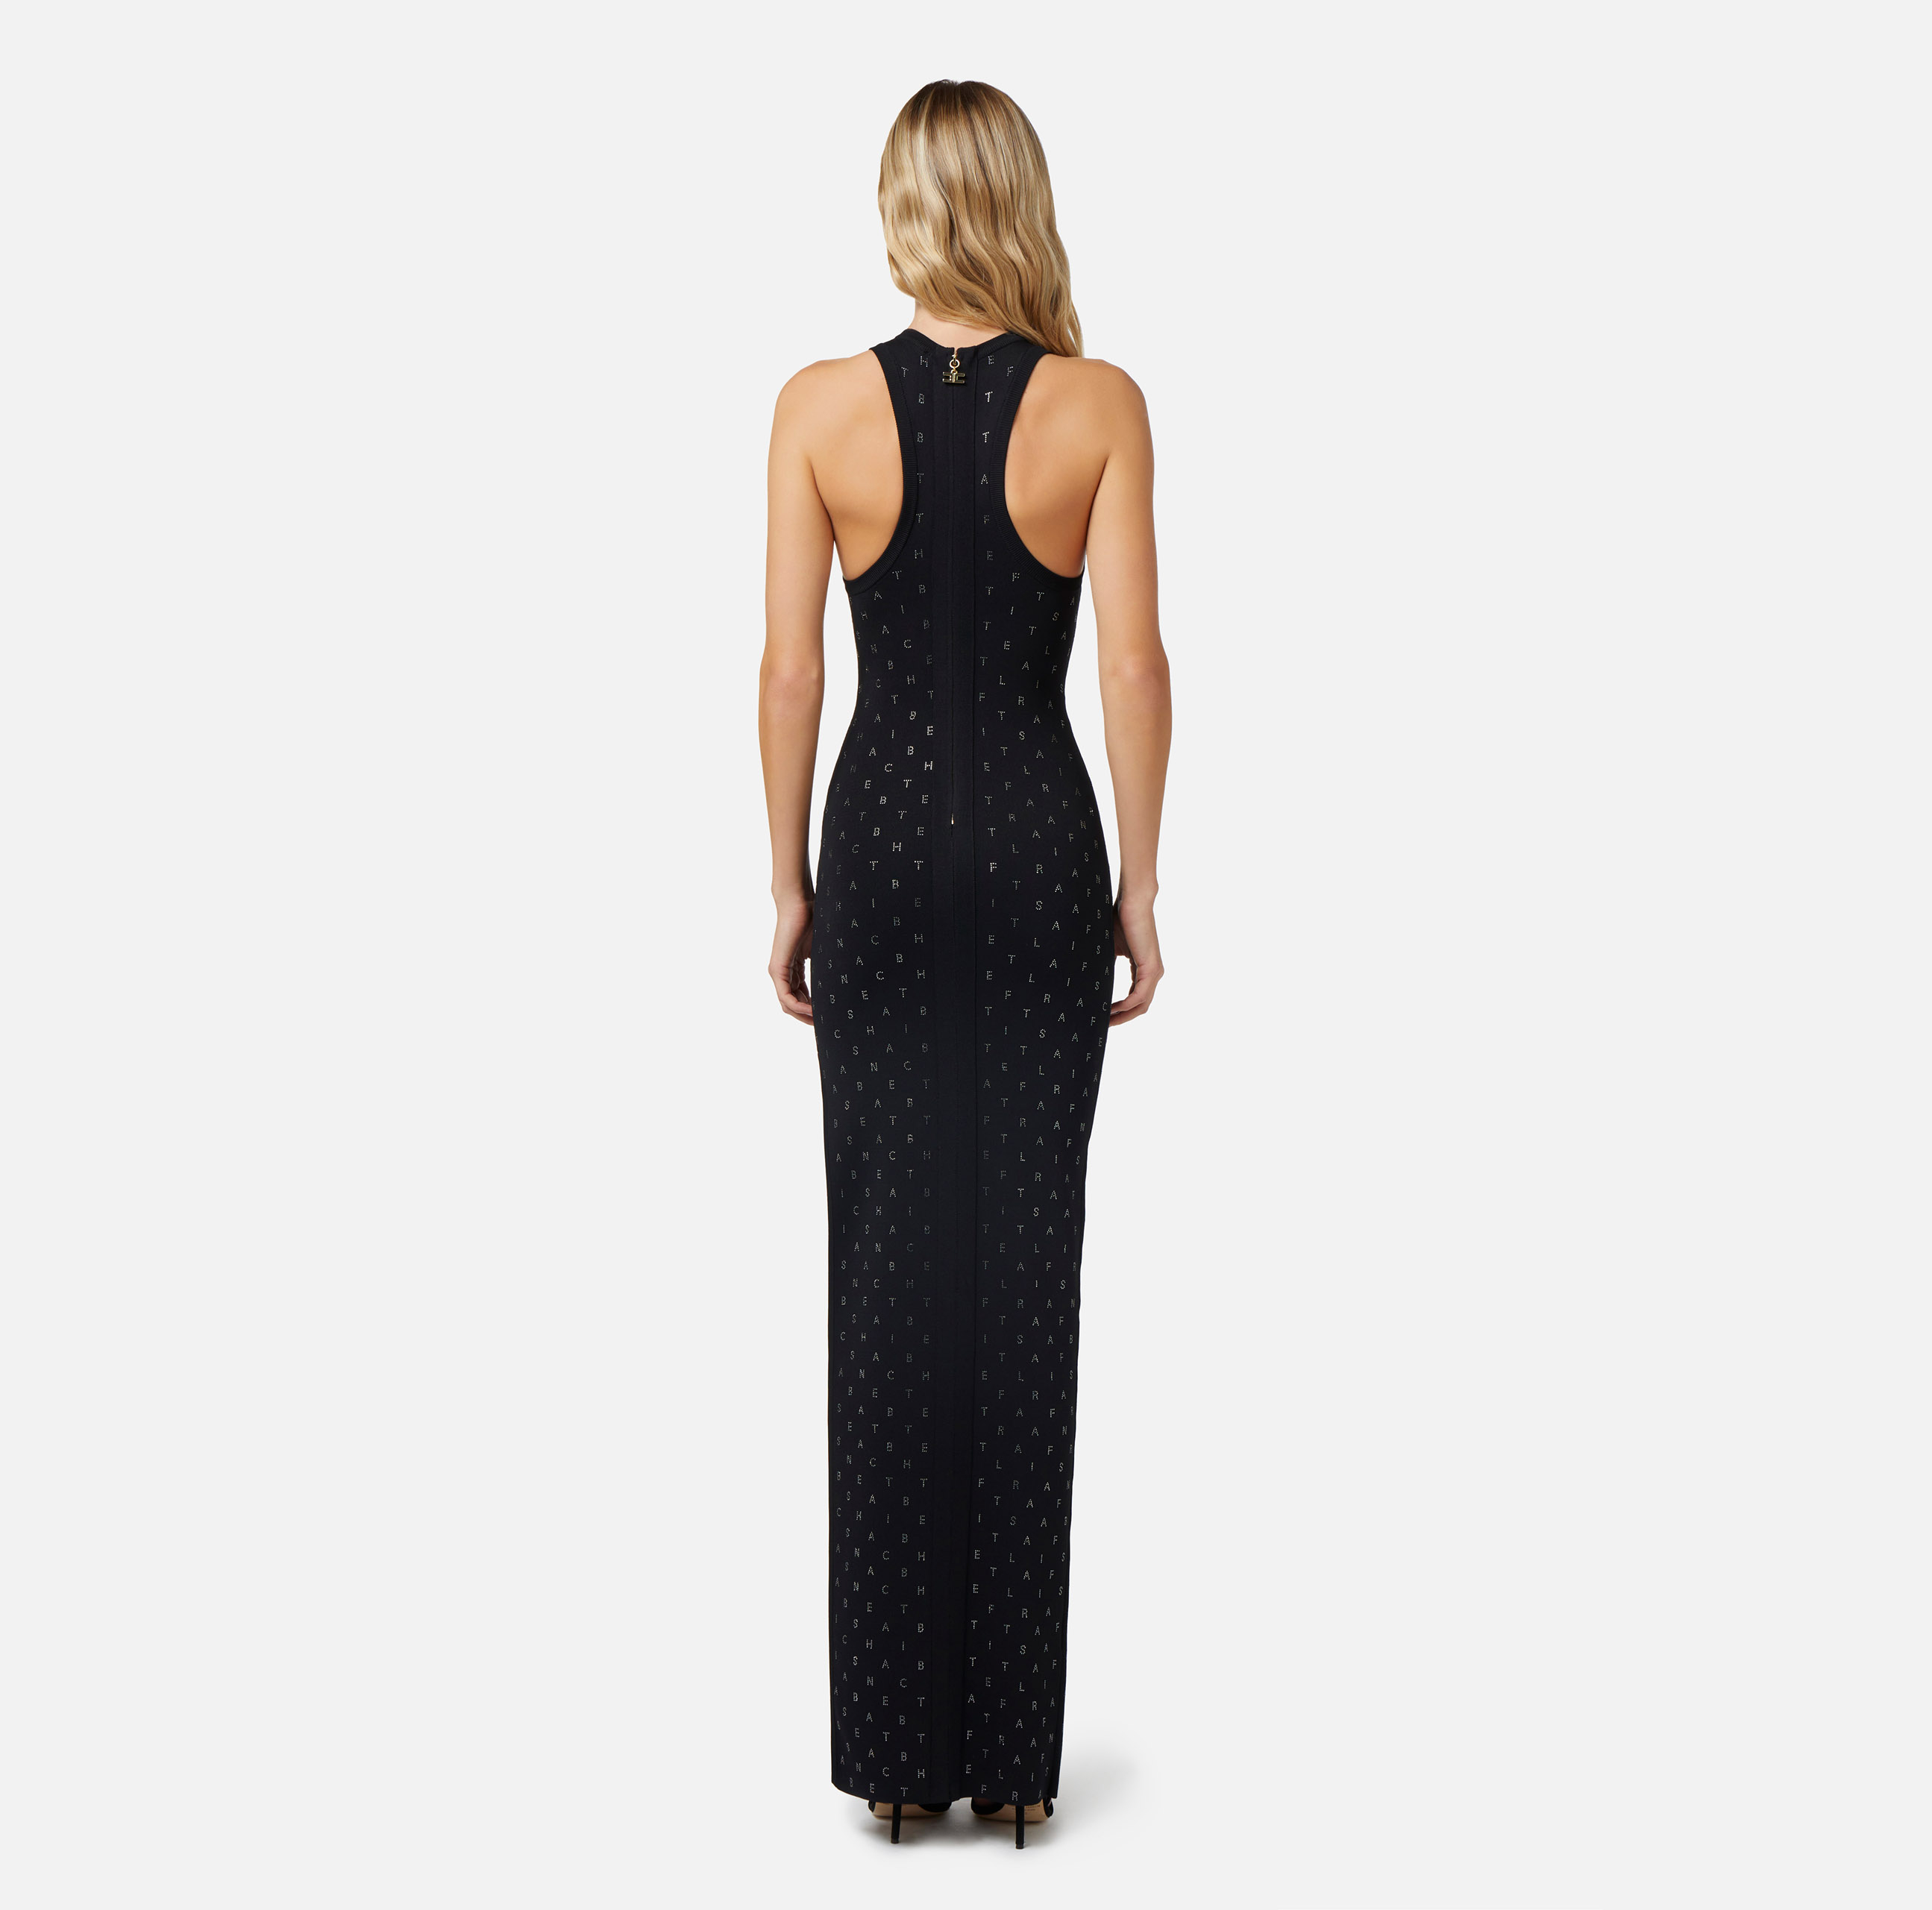 Red carpet dress in viscose with rhinestone lettering - Elisabetta Franchi